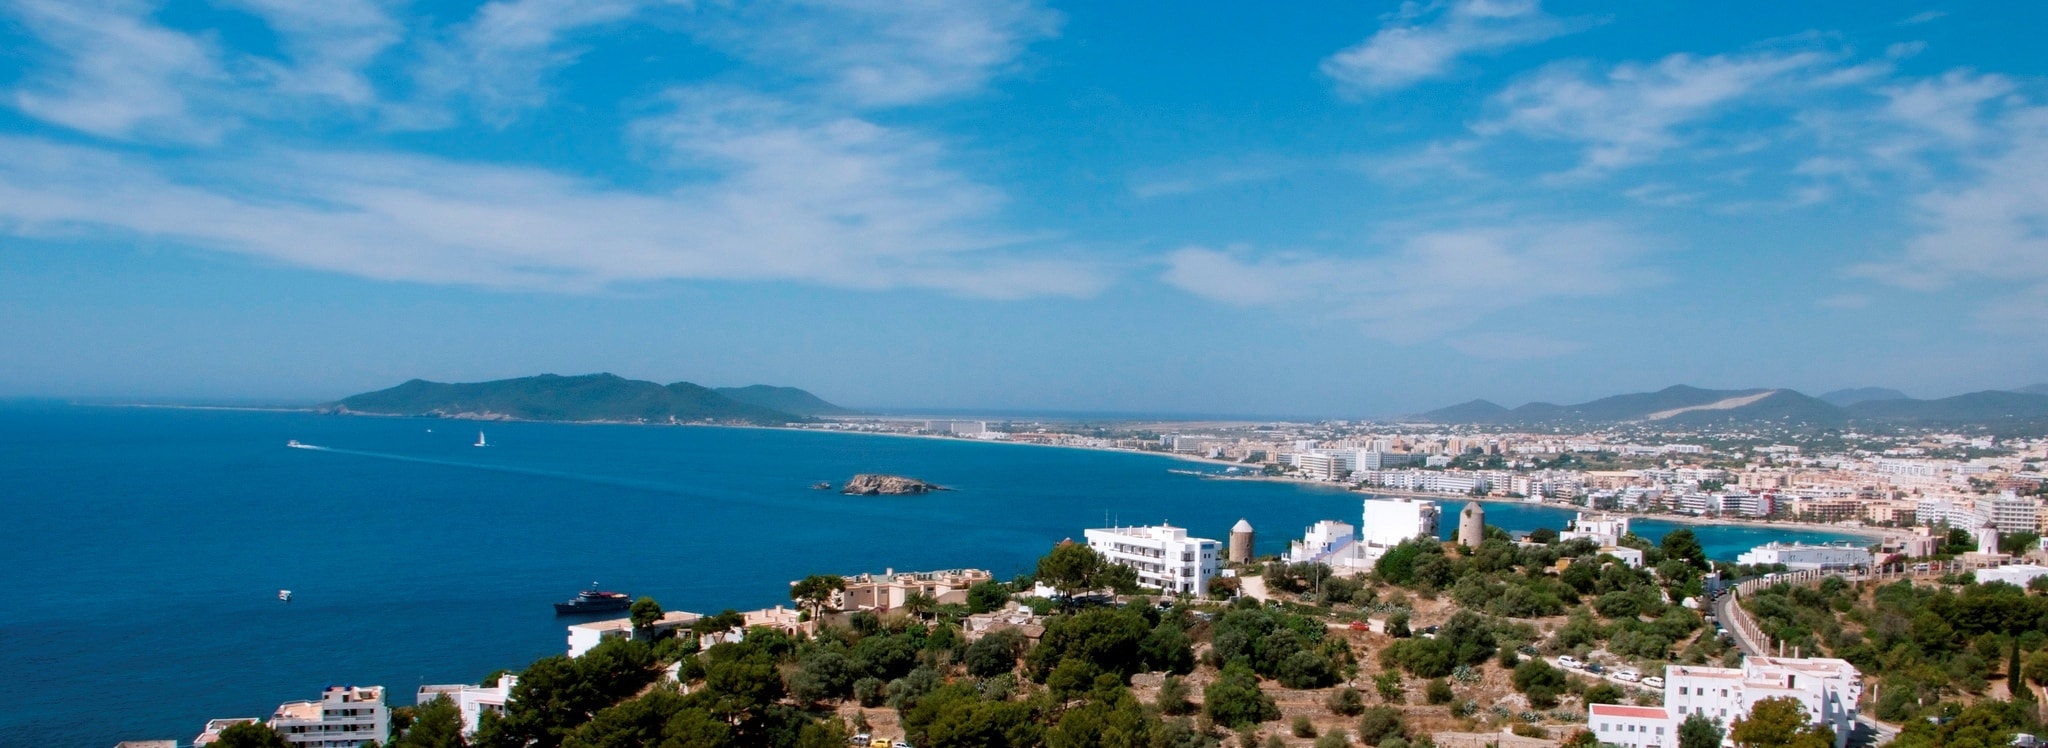 Ibiza Town property market offers houses ranging from high-class luxury penthouses to authentic estates and charming holiday homes.